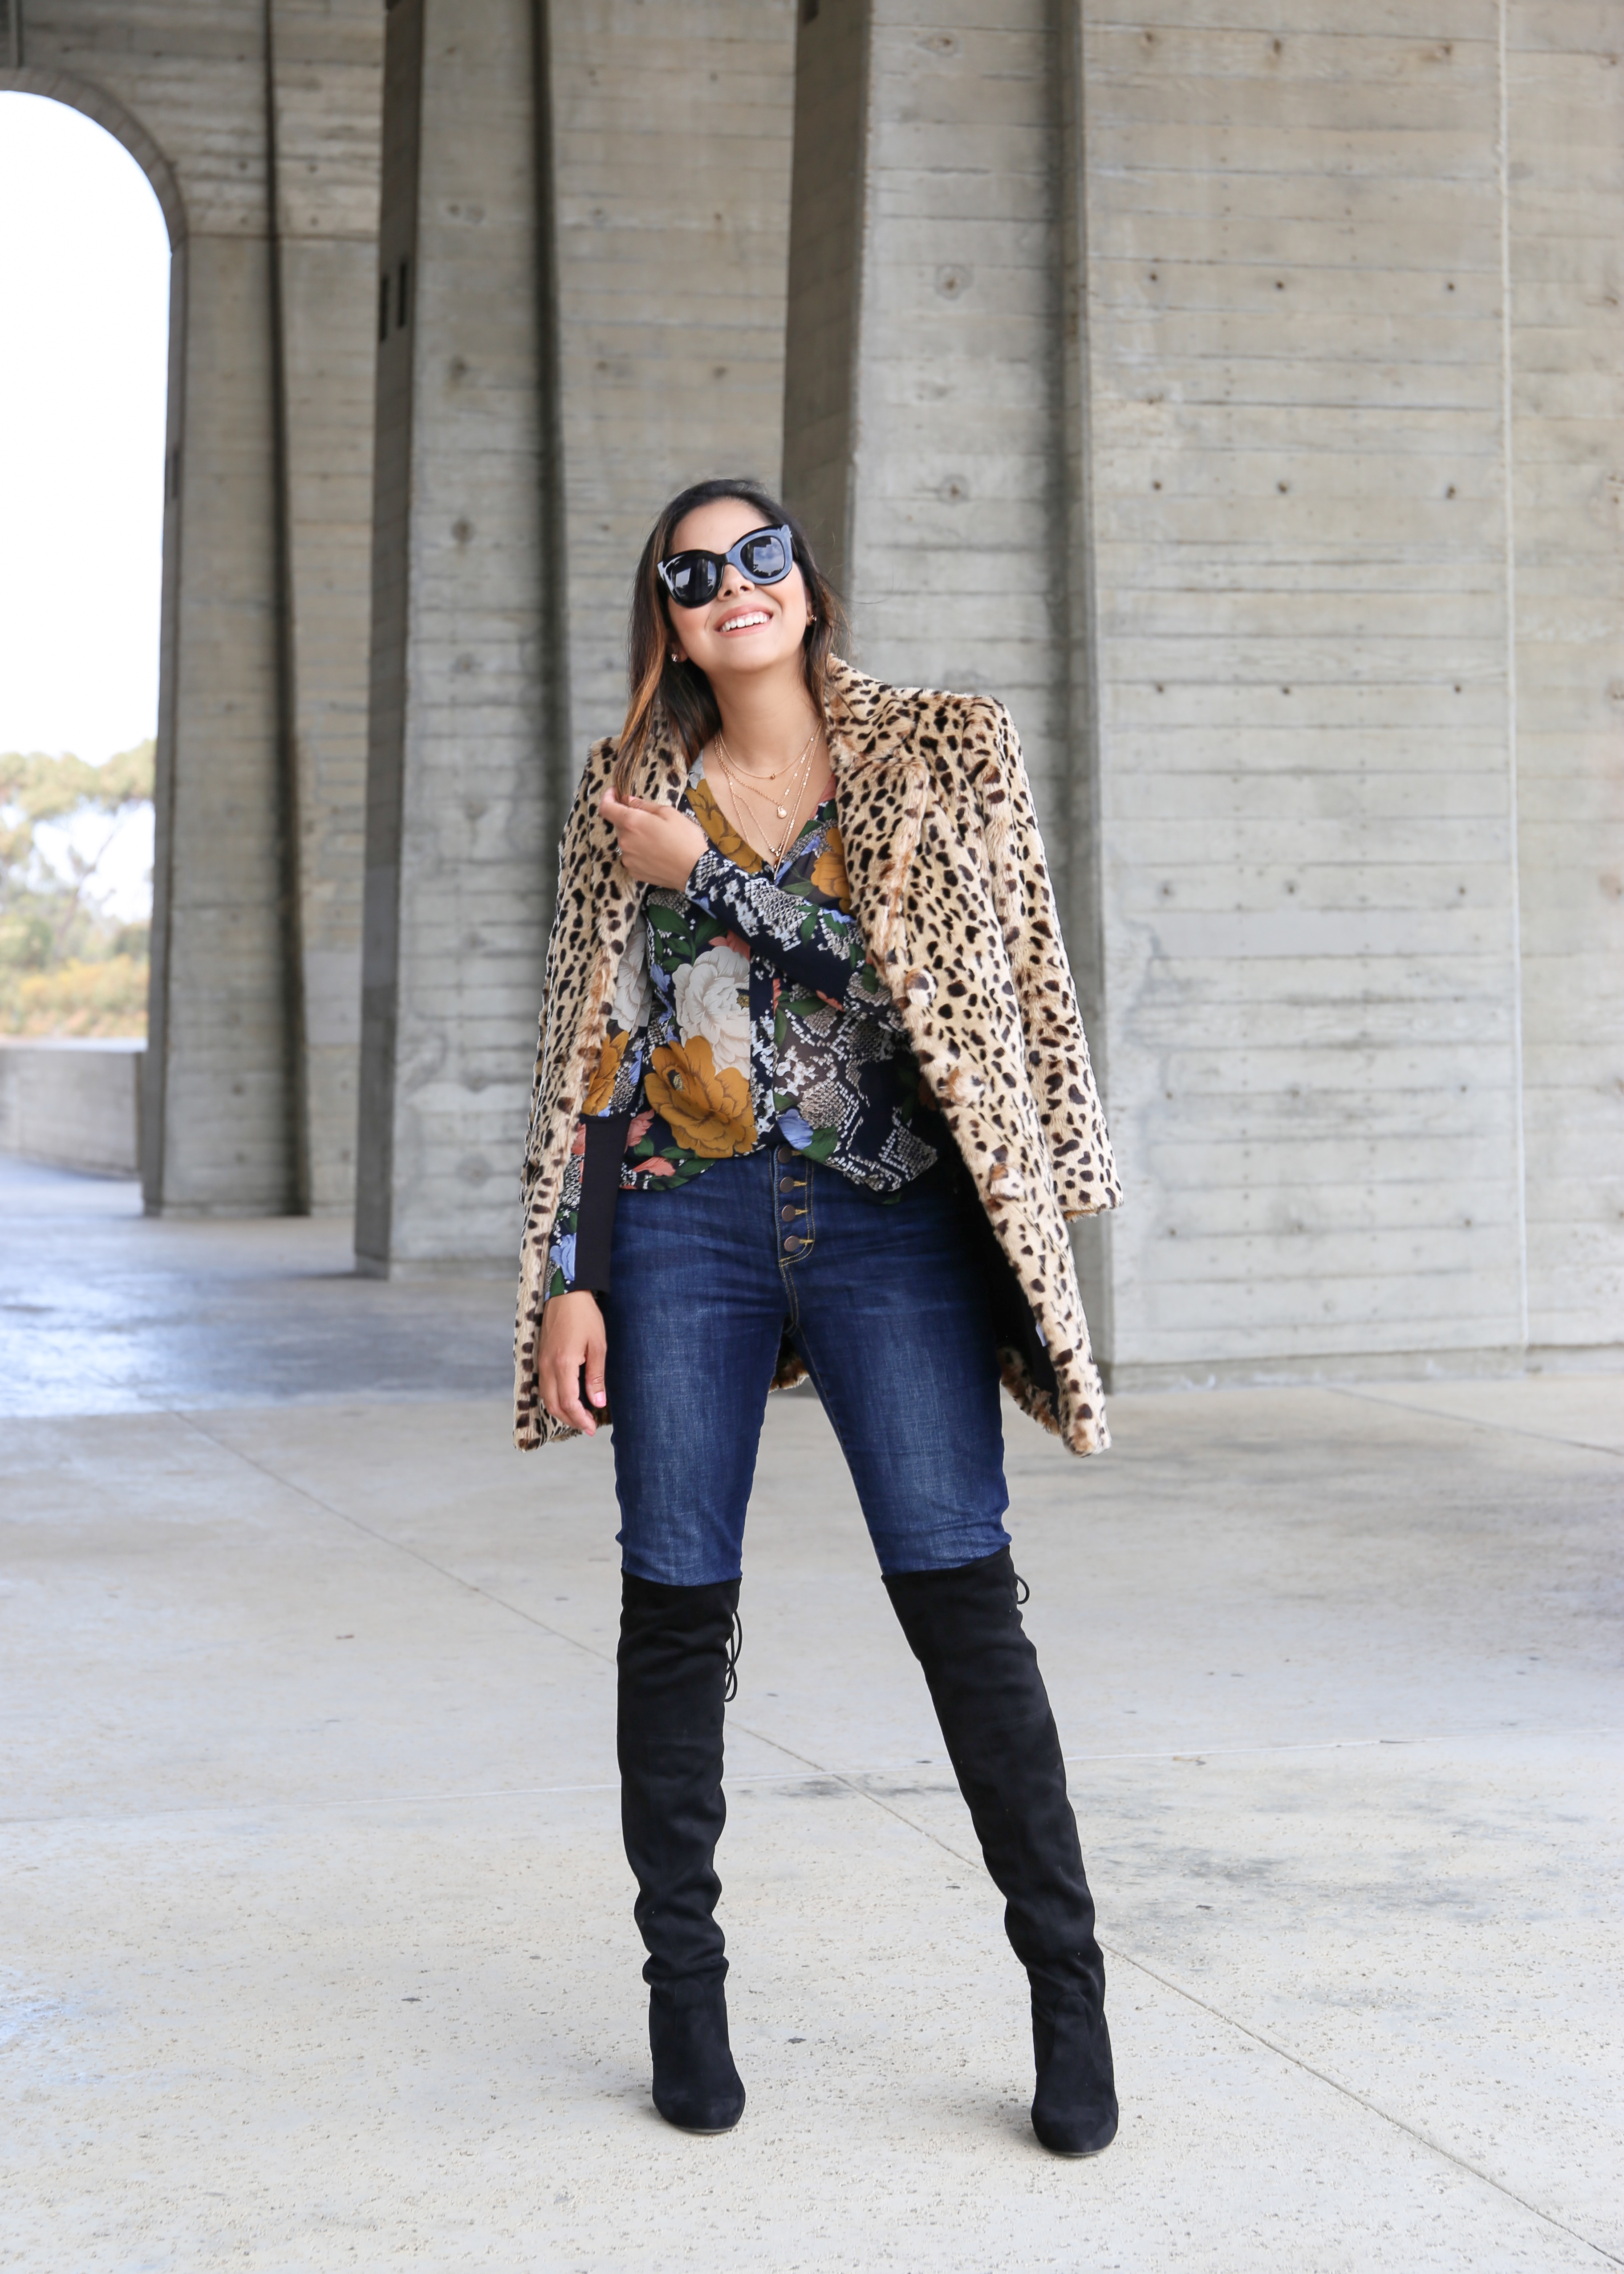 Fall Outfit Wearing Leopard x Leopard, Fall Fashion